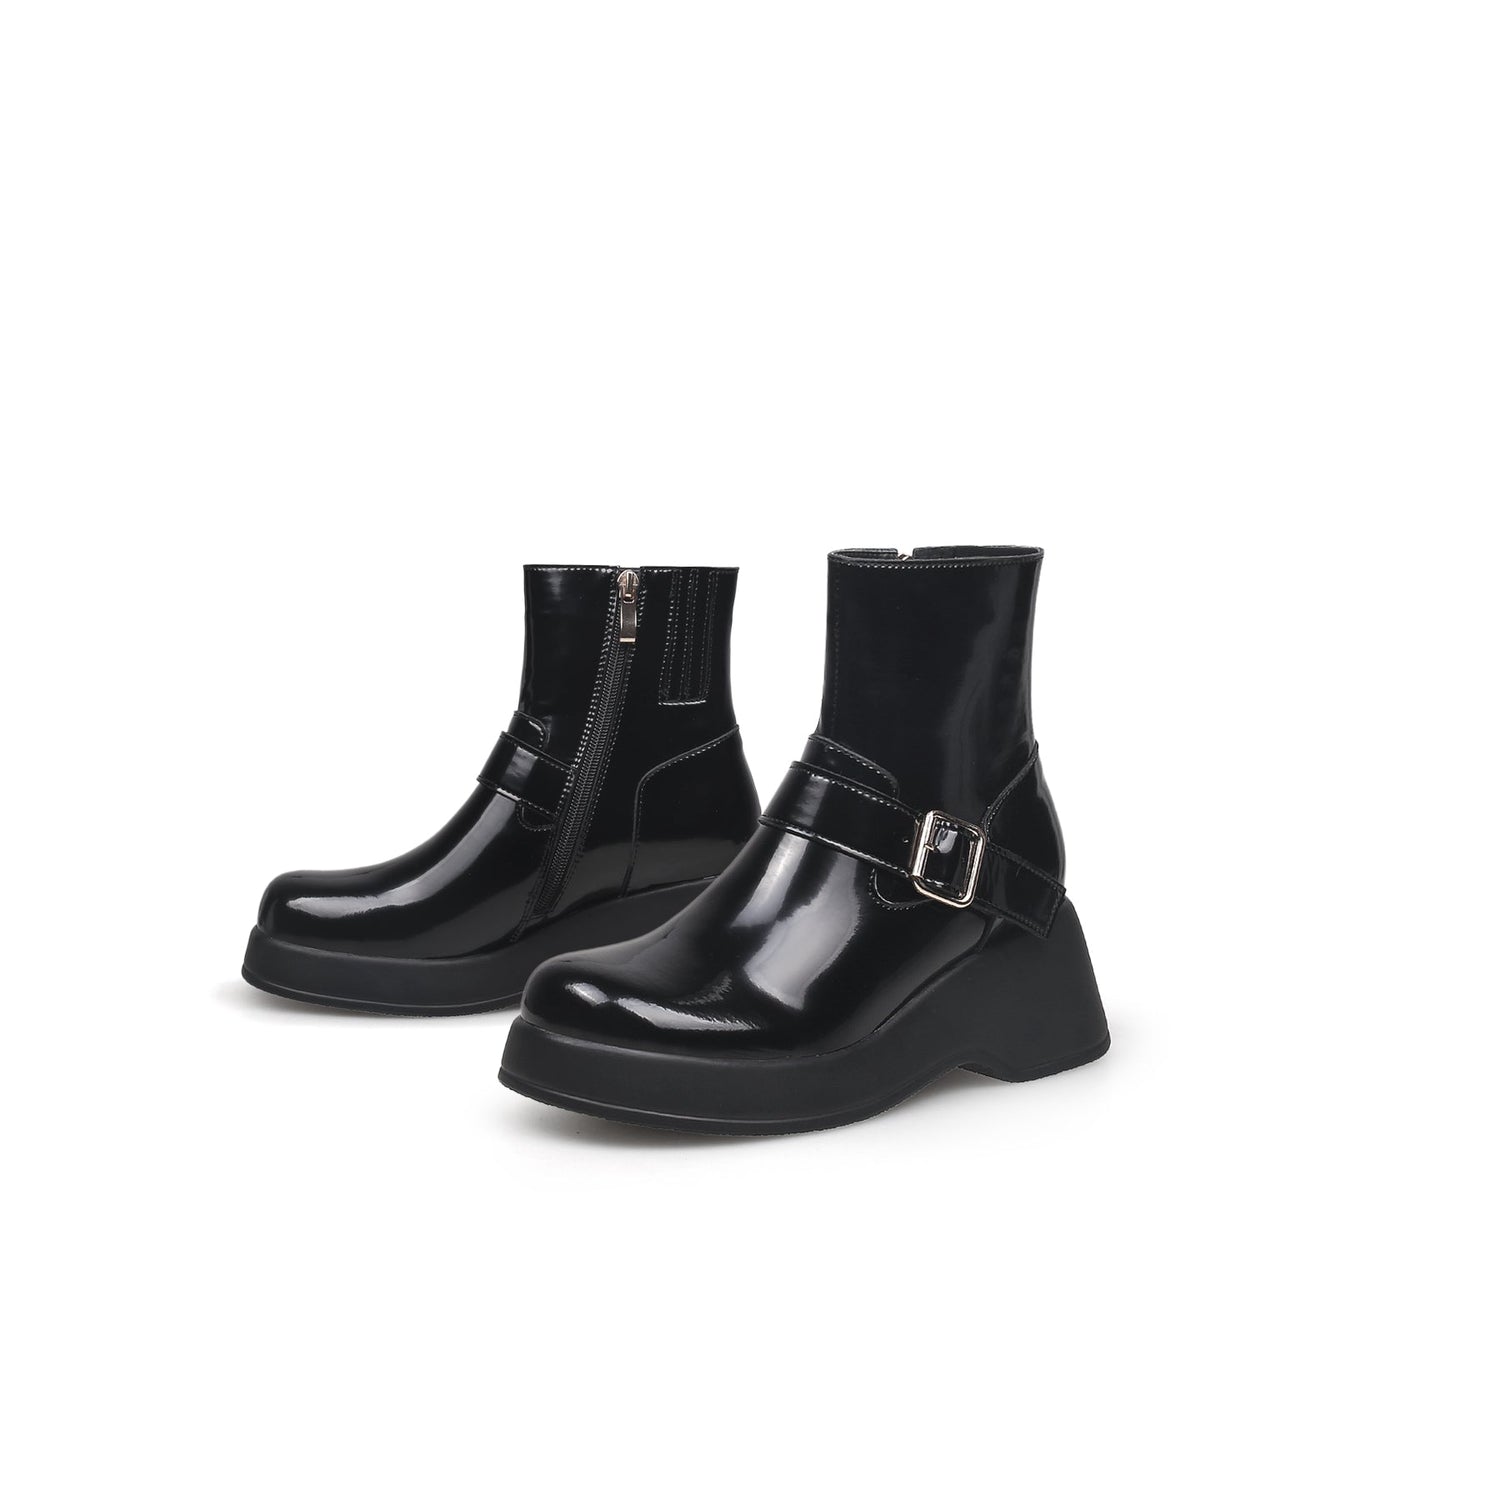 Buckled Walllie Patent Black Boots - 0cm